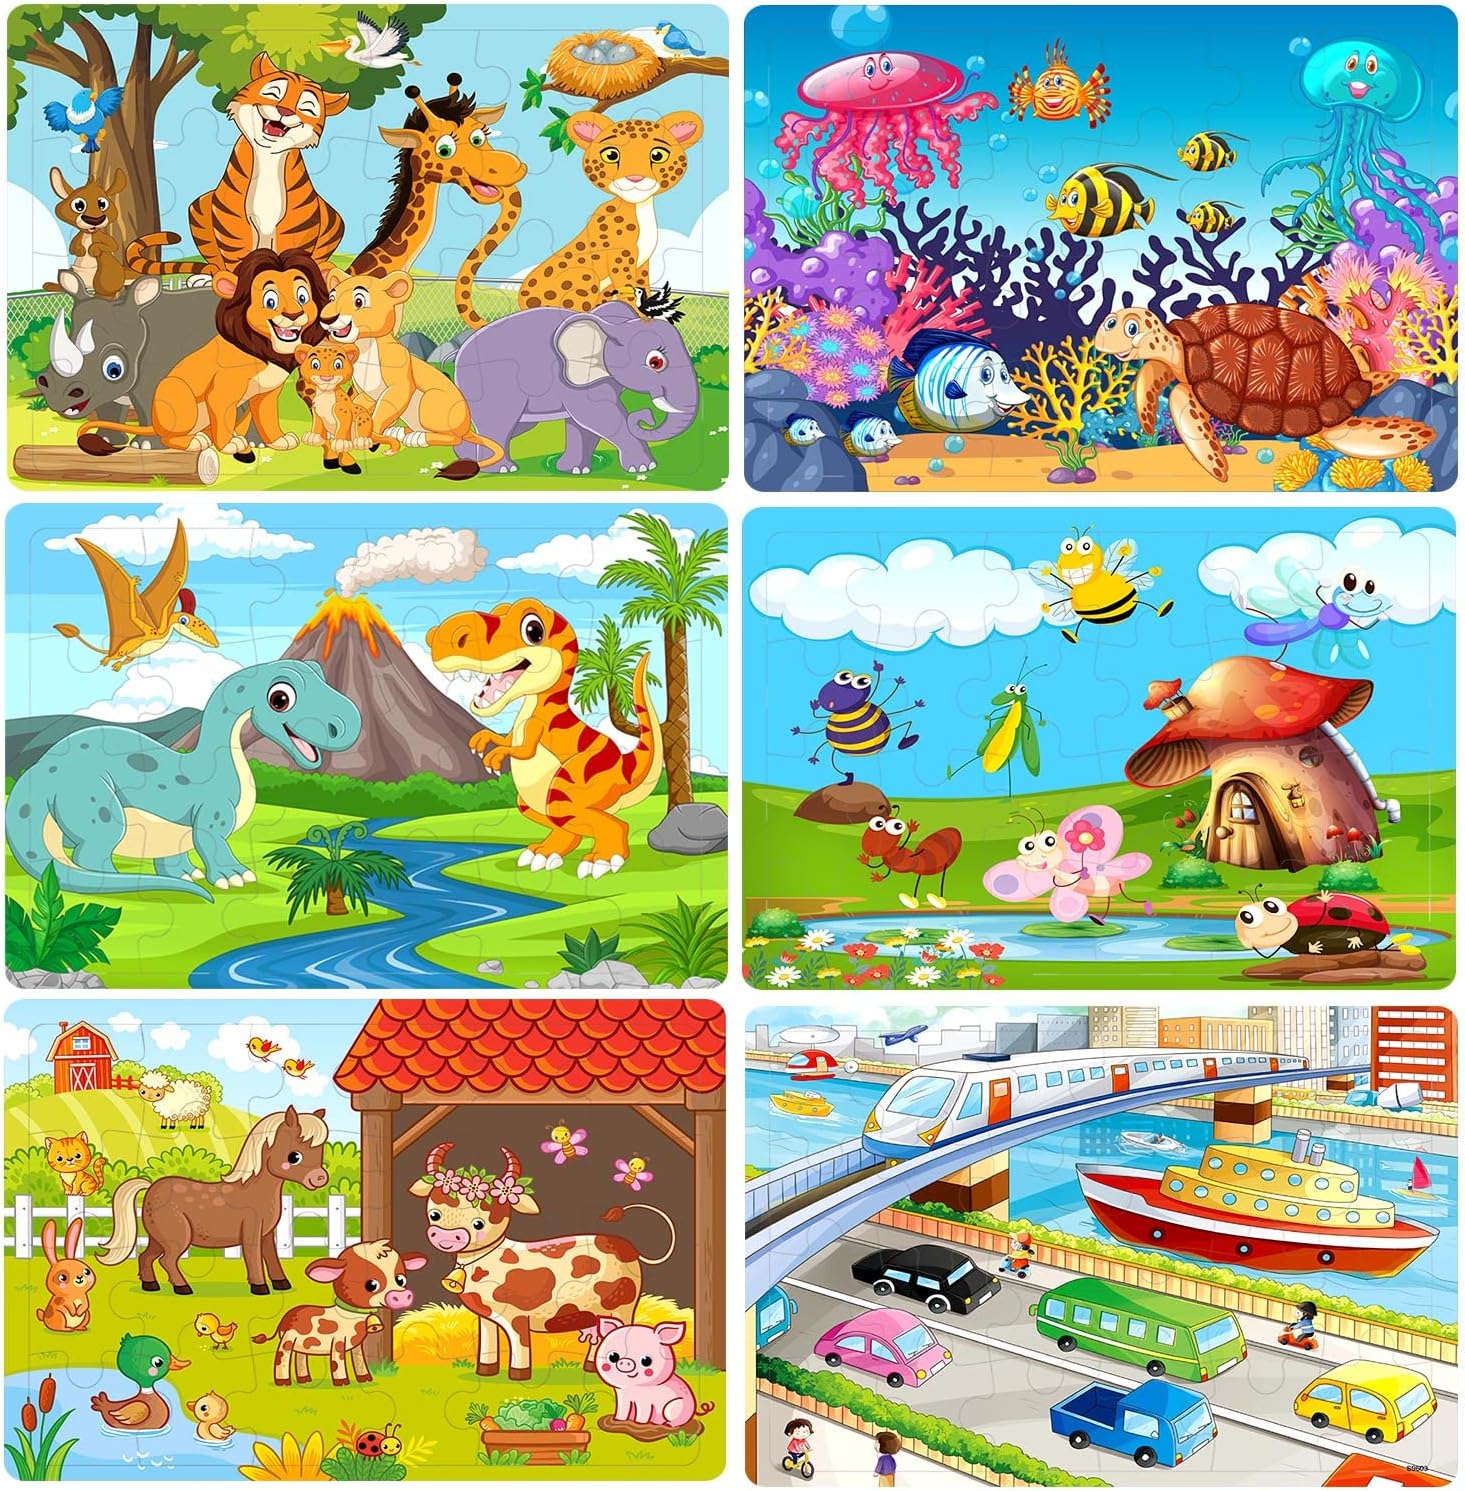 Puzzles for Kids Ages 3-5, 24 Piece Colorful Wooden Puzzles for Toddler Children Learning Educational Puzzles Toys for Boys and Girls Set for Kids 3 4 5 6 Year Old (6 Puzzles)